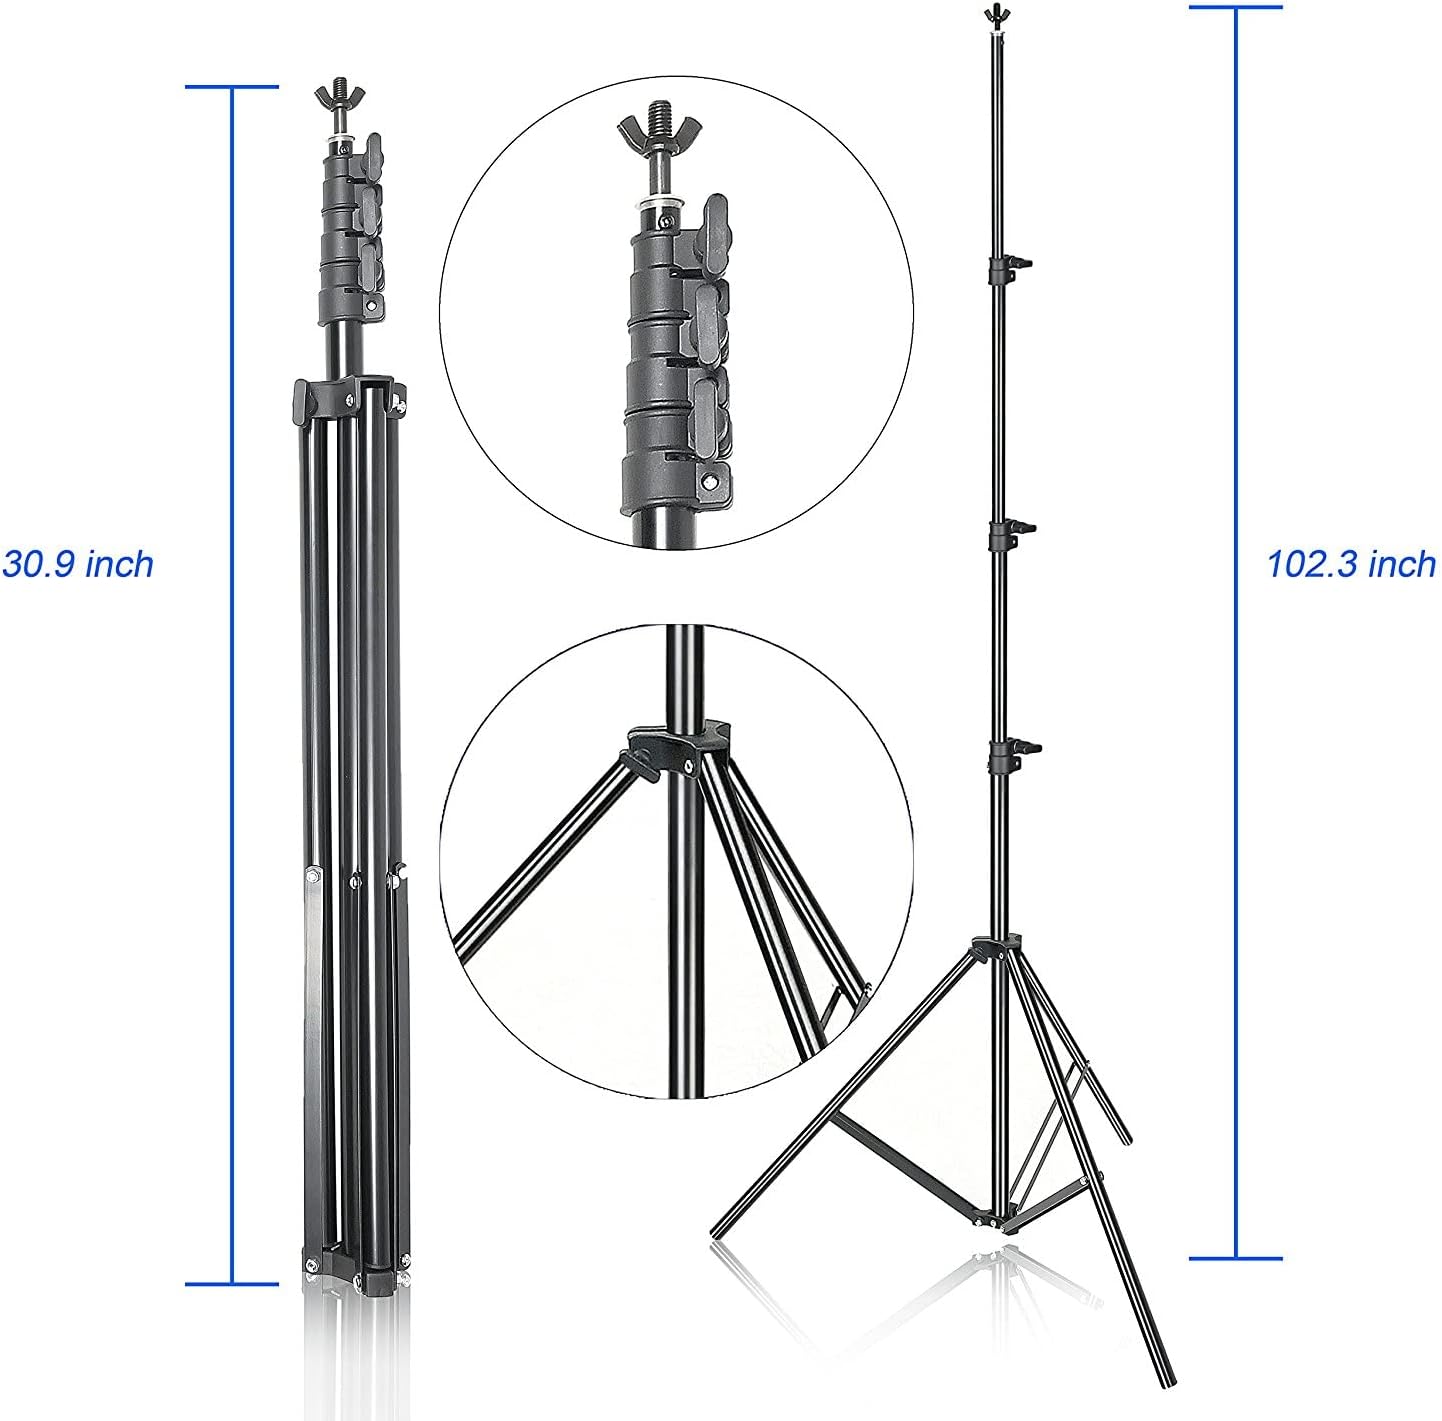 HYJ-INC 10ft x 8.5ft Adjustable Photography Backdrop Support System Photo Video Studio Muslin Background Stand Kit with Carry Bag